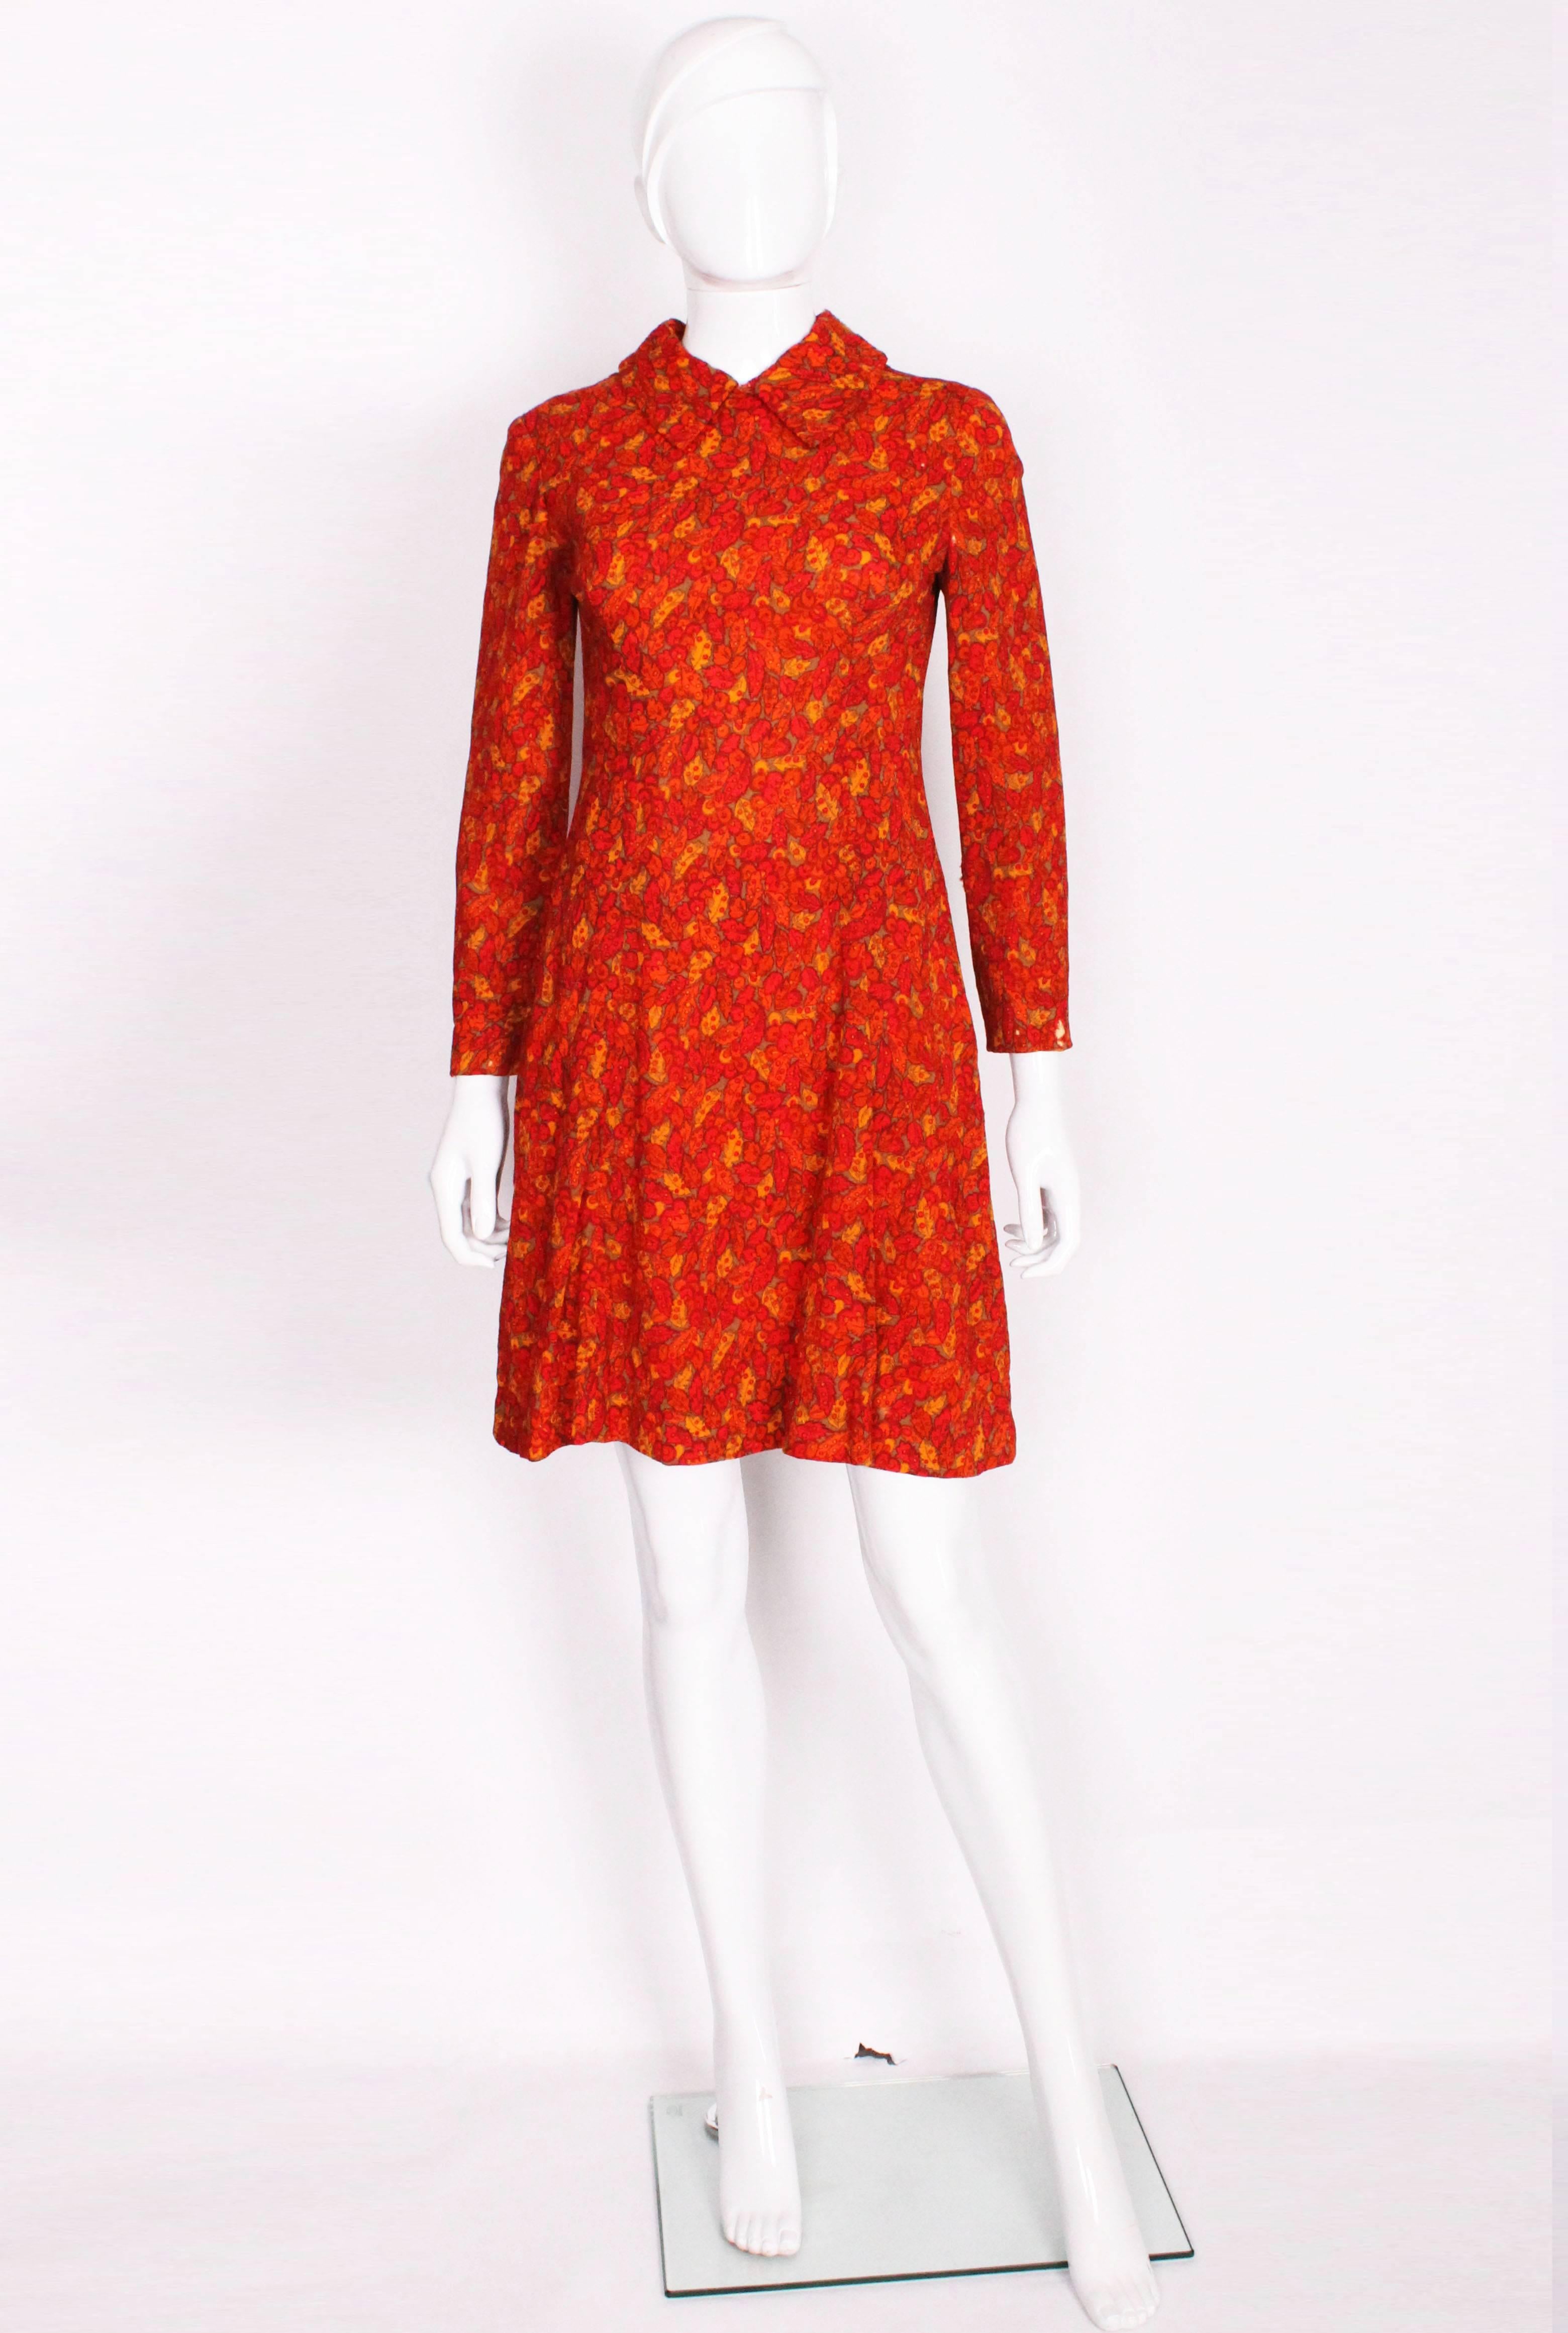 The print of this dress makes it a great piece for an autumnal day. It is a classic 1960's mini dress in lovely bright colours. The fine leaf print is made up of a wonderful mix of firey colours, with tones of red, orange, yellow and brown. It has a